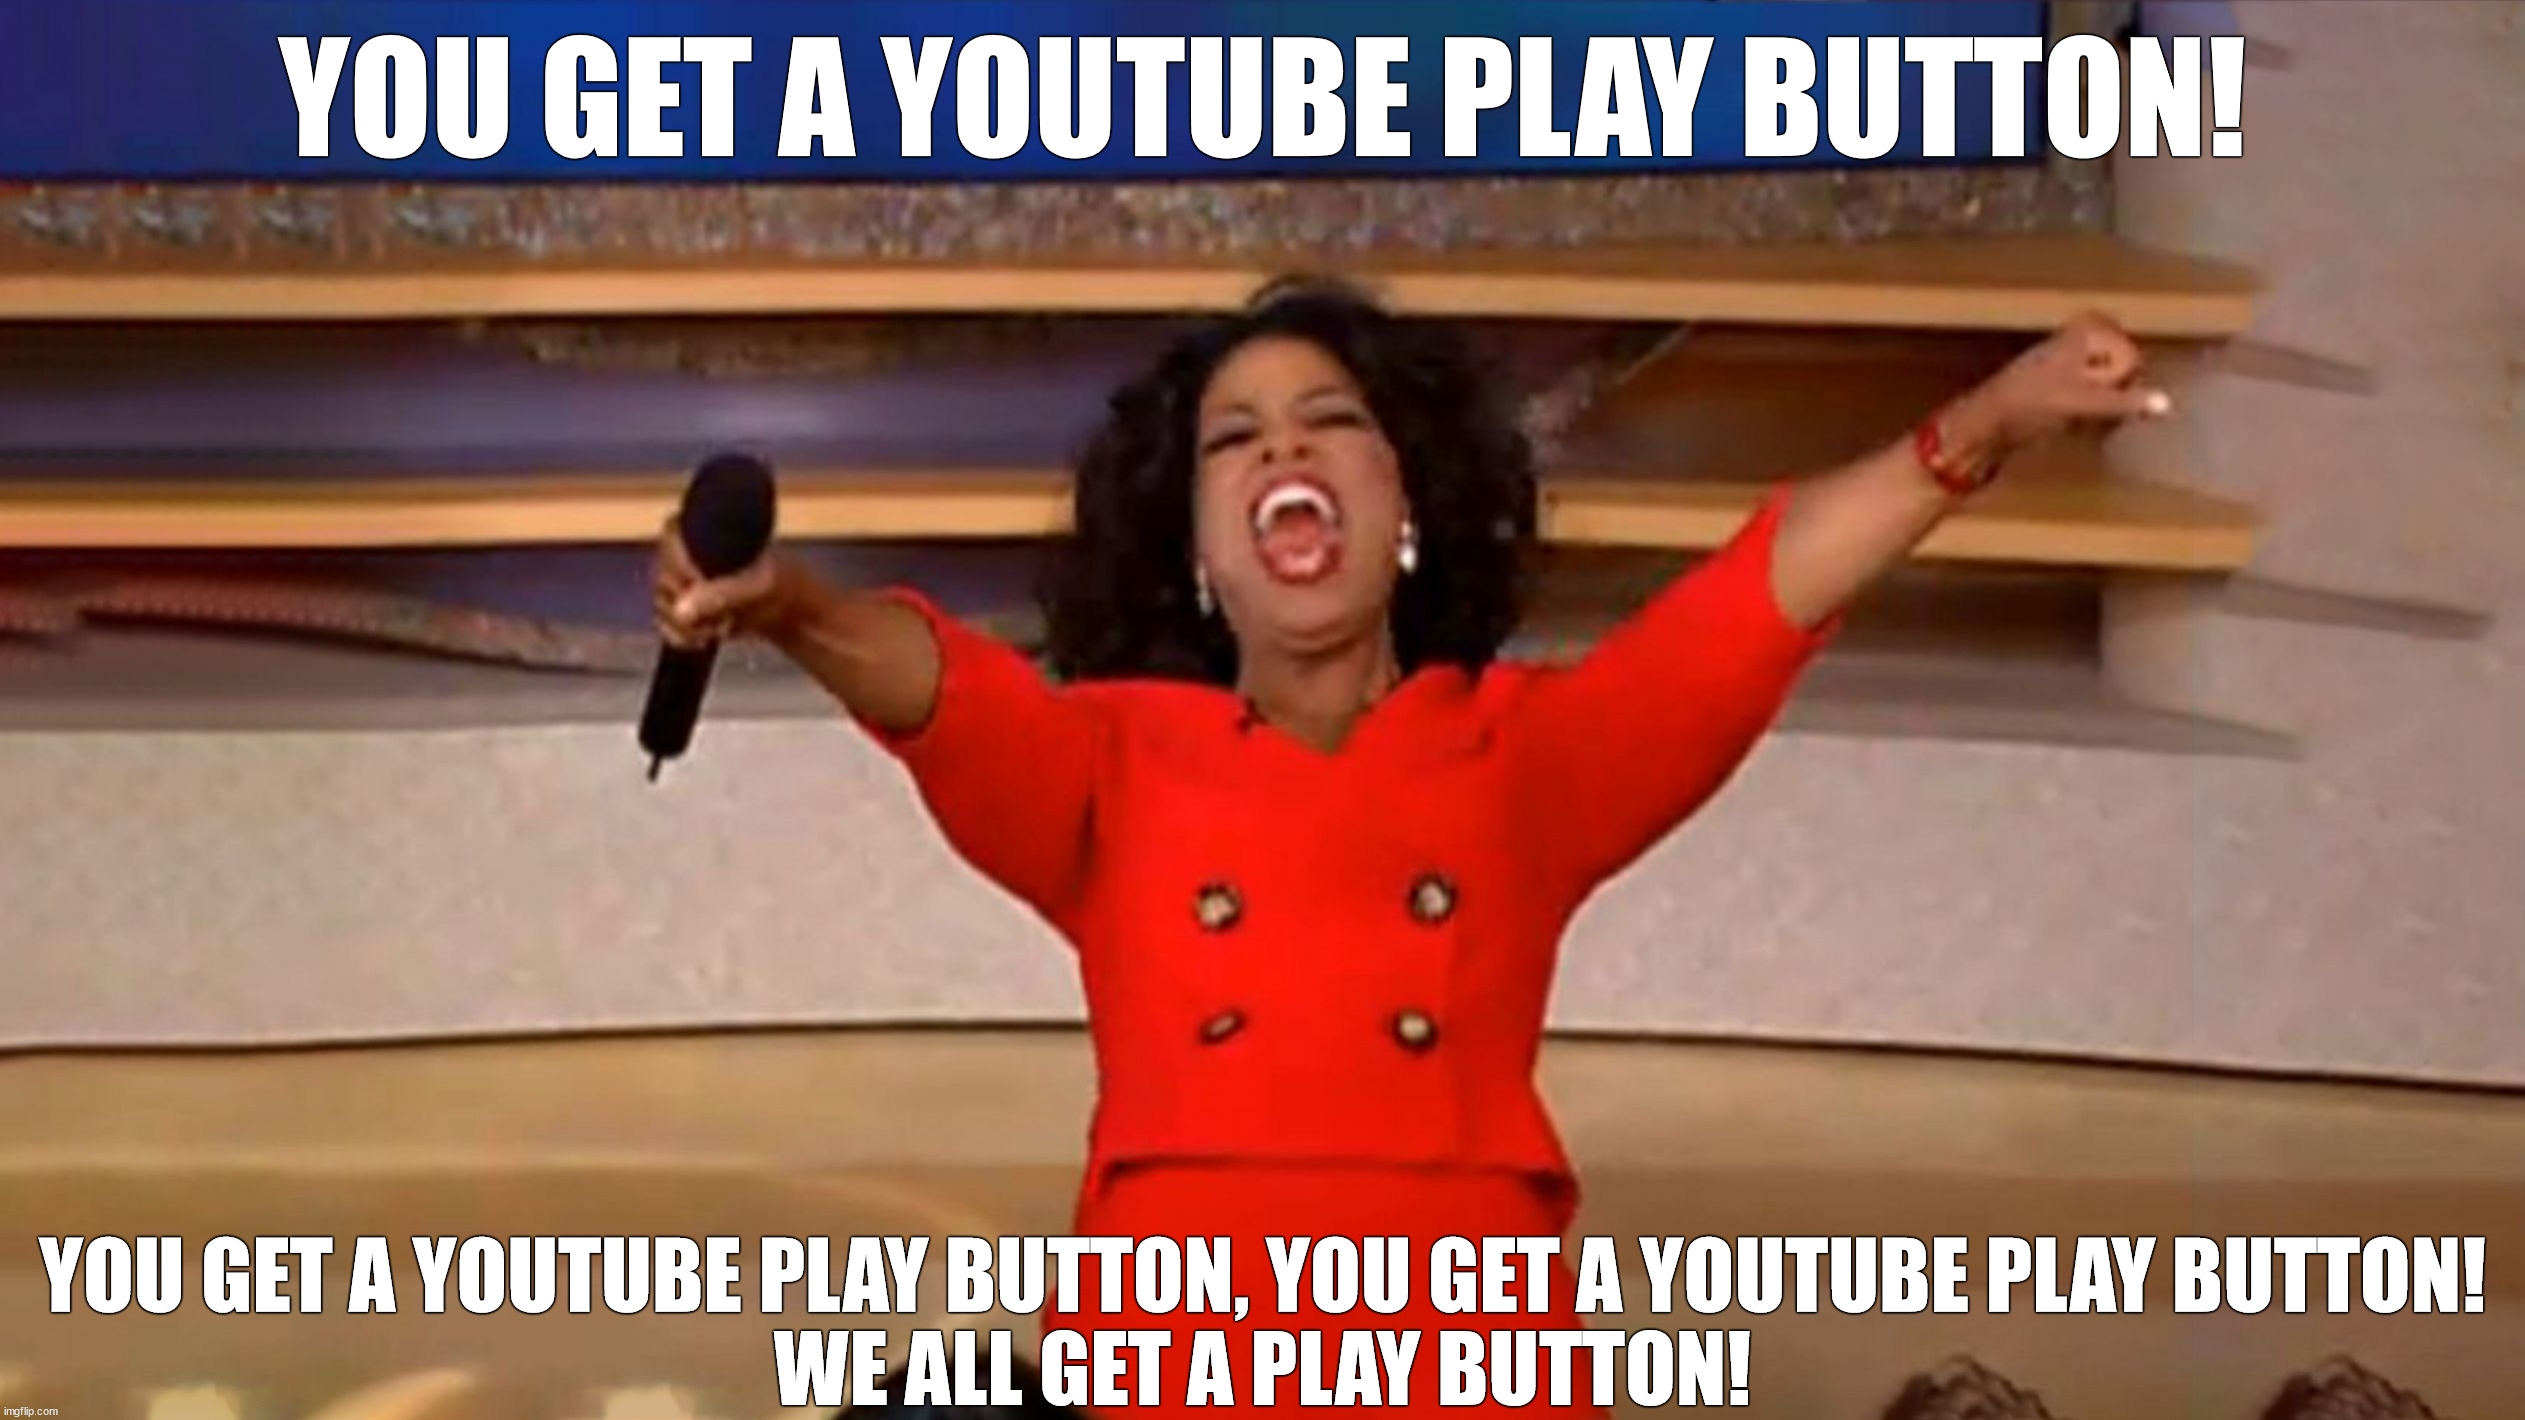 Oprah Winfrey gives out YouTube Play Buttons | YOU GET A YOUTUBE PLAY BUTTON! YOU GET A YOUTUBE PLAY BUTTON, YOU GET A YOUTUBE PLAY BUTTON!
WE ALL GET A PLAY BUTTON! | image tagged in youtube,play,button,jack,sucks,meme | made w/ Imgflip meme maker